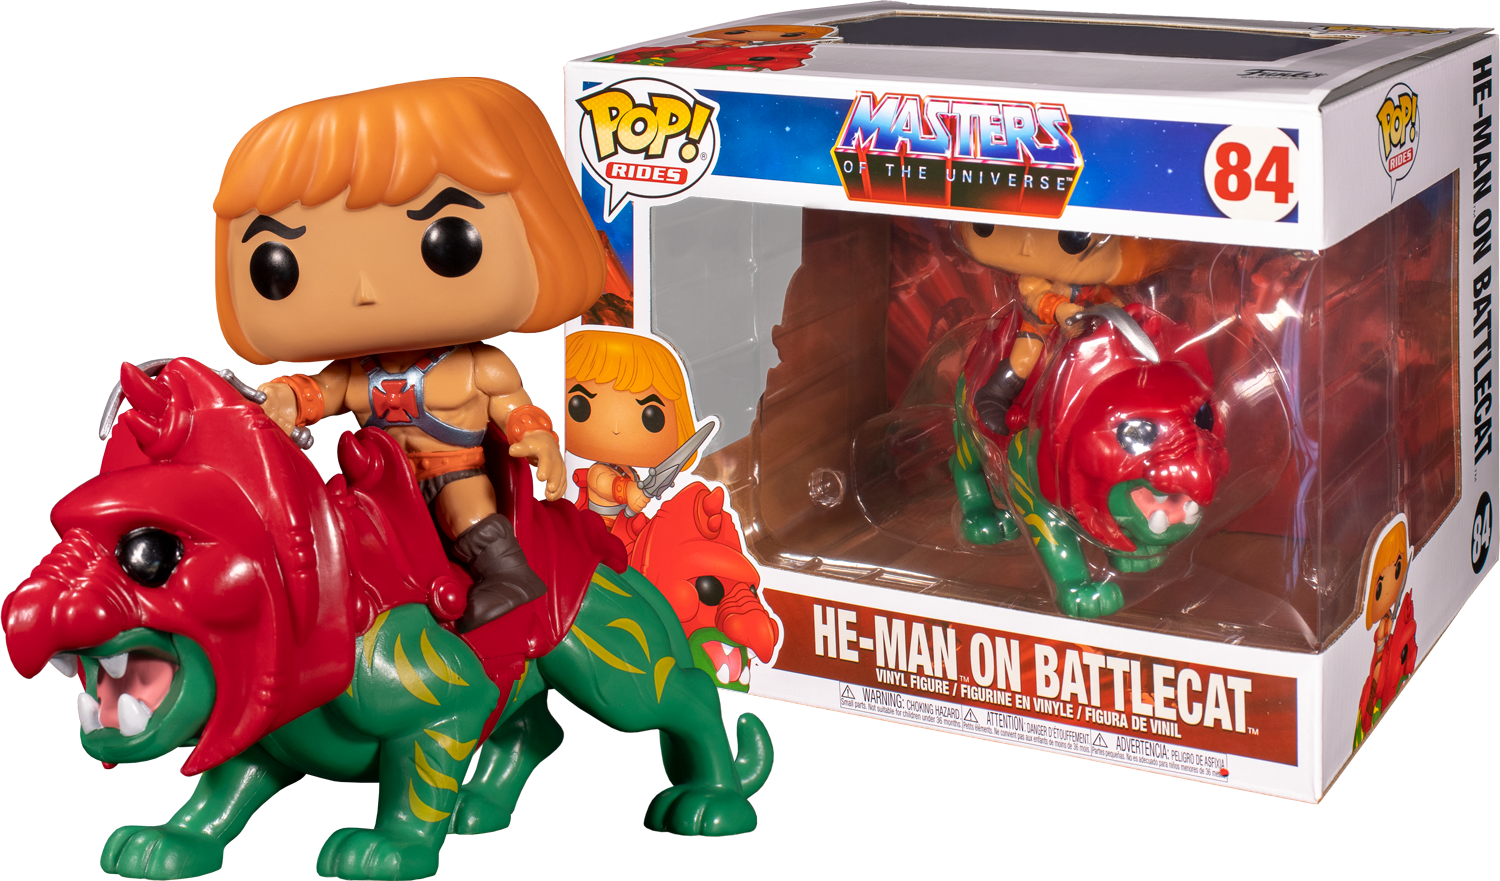 Funko Pop! Rides - Masters of the Universe - He-Man on Battle Cat #84